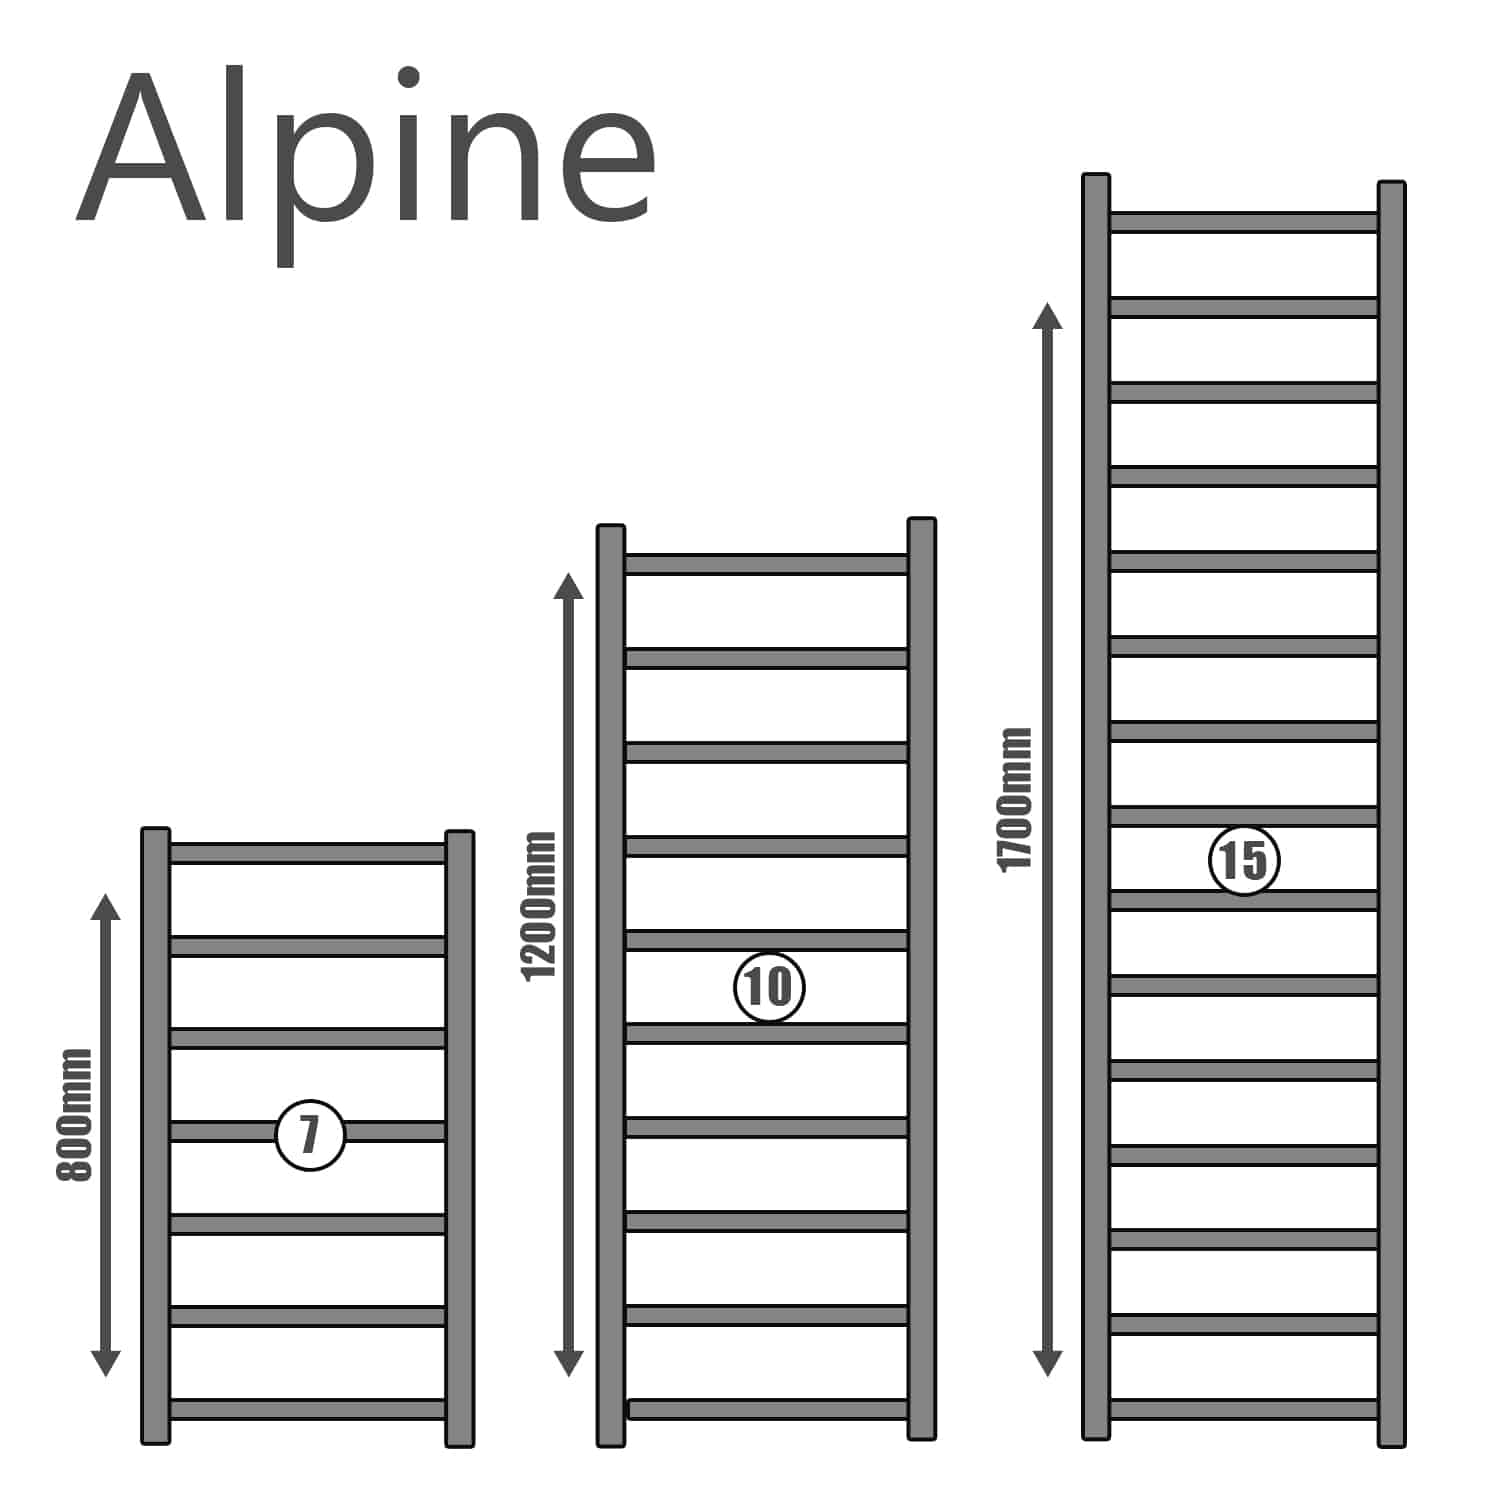 Alpine Anthracite | Smart Electric Towel Rail with Thermostat, Timer + WiFi Control Best Quality & Price, Energy Saving / Economic To Run Buy Online From Adax SolAire UK Shop 21